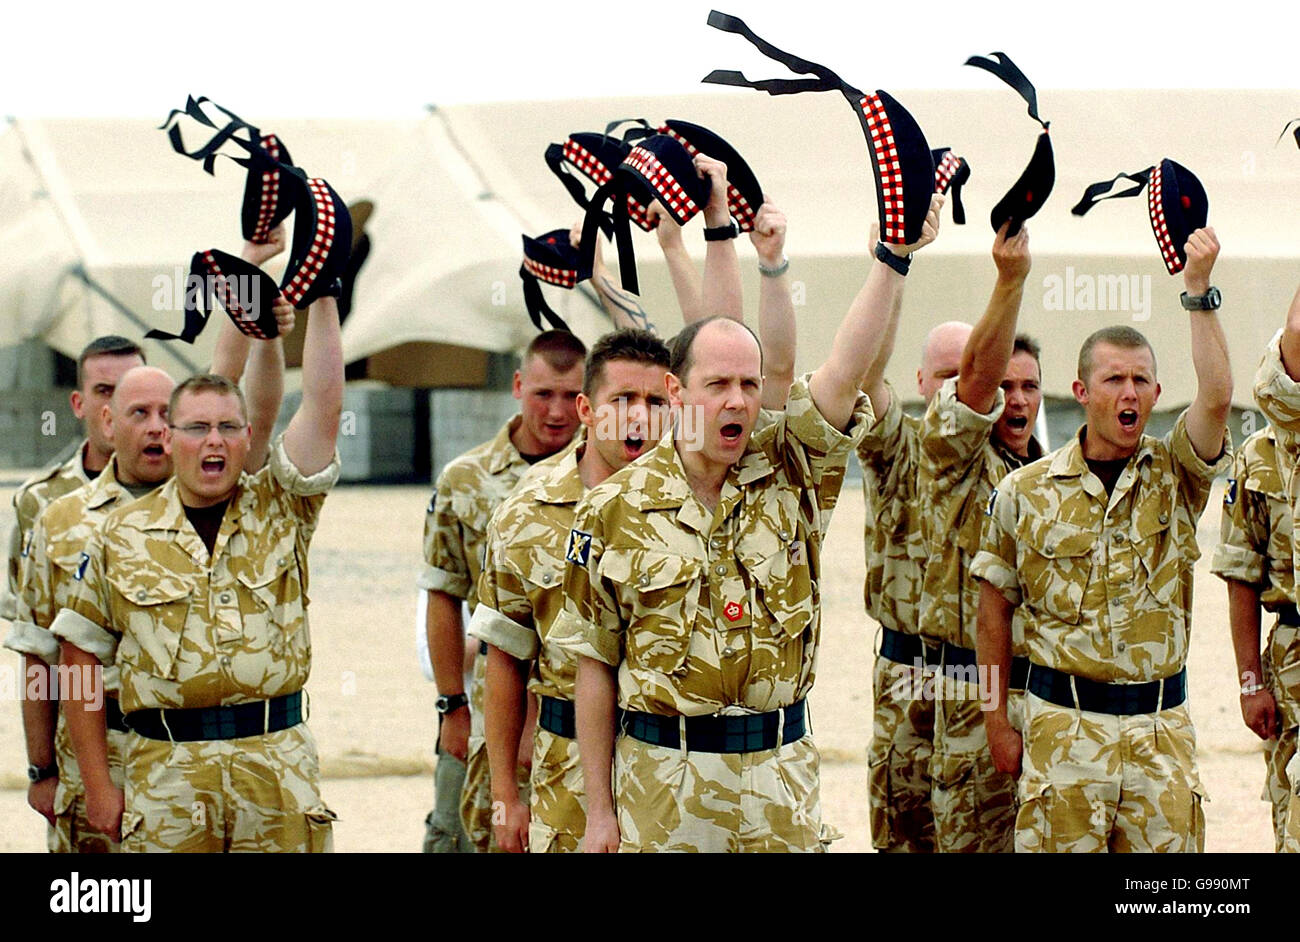 Members of the former Royal Scots regiment raise their new Glengarrys during a re-badgeing ceremony to mark the formation of the new Royal Regiment of Scotland (RRS) at the Shaibah logistic base in Basra, southern Iraq, Tuesday March 28, 2006. Ceremonies also took place today in Edinburgh, Cyprus and Belfast to mark the merger of six Scottish regiments to form the RRS. See PA story DEFENCE Regiments. PRESS ASSOCIATION photo. Photo credit should read: Danny Lawson/PA. Stock Photo